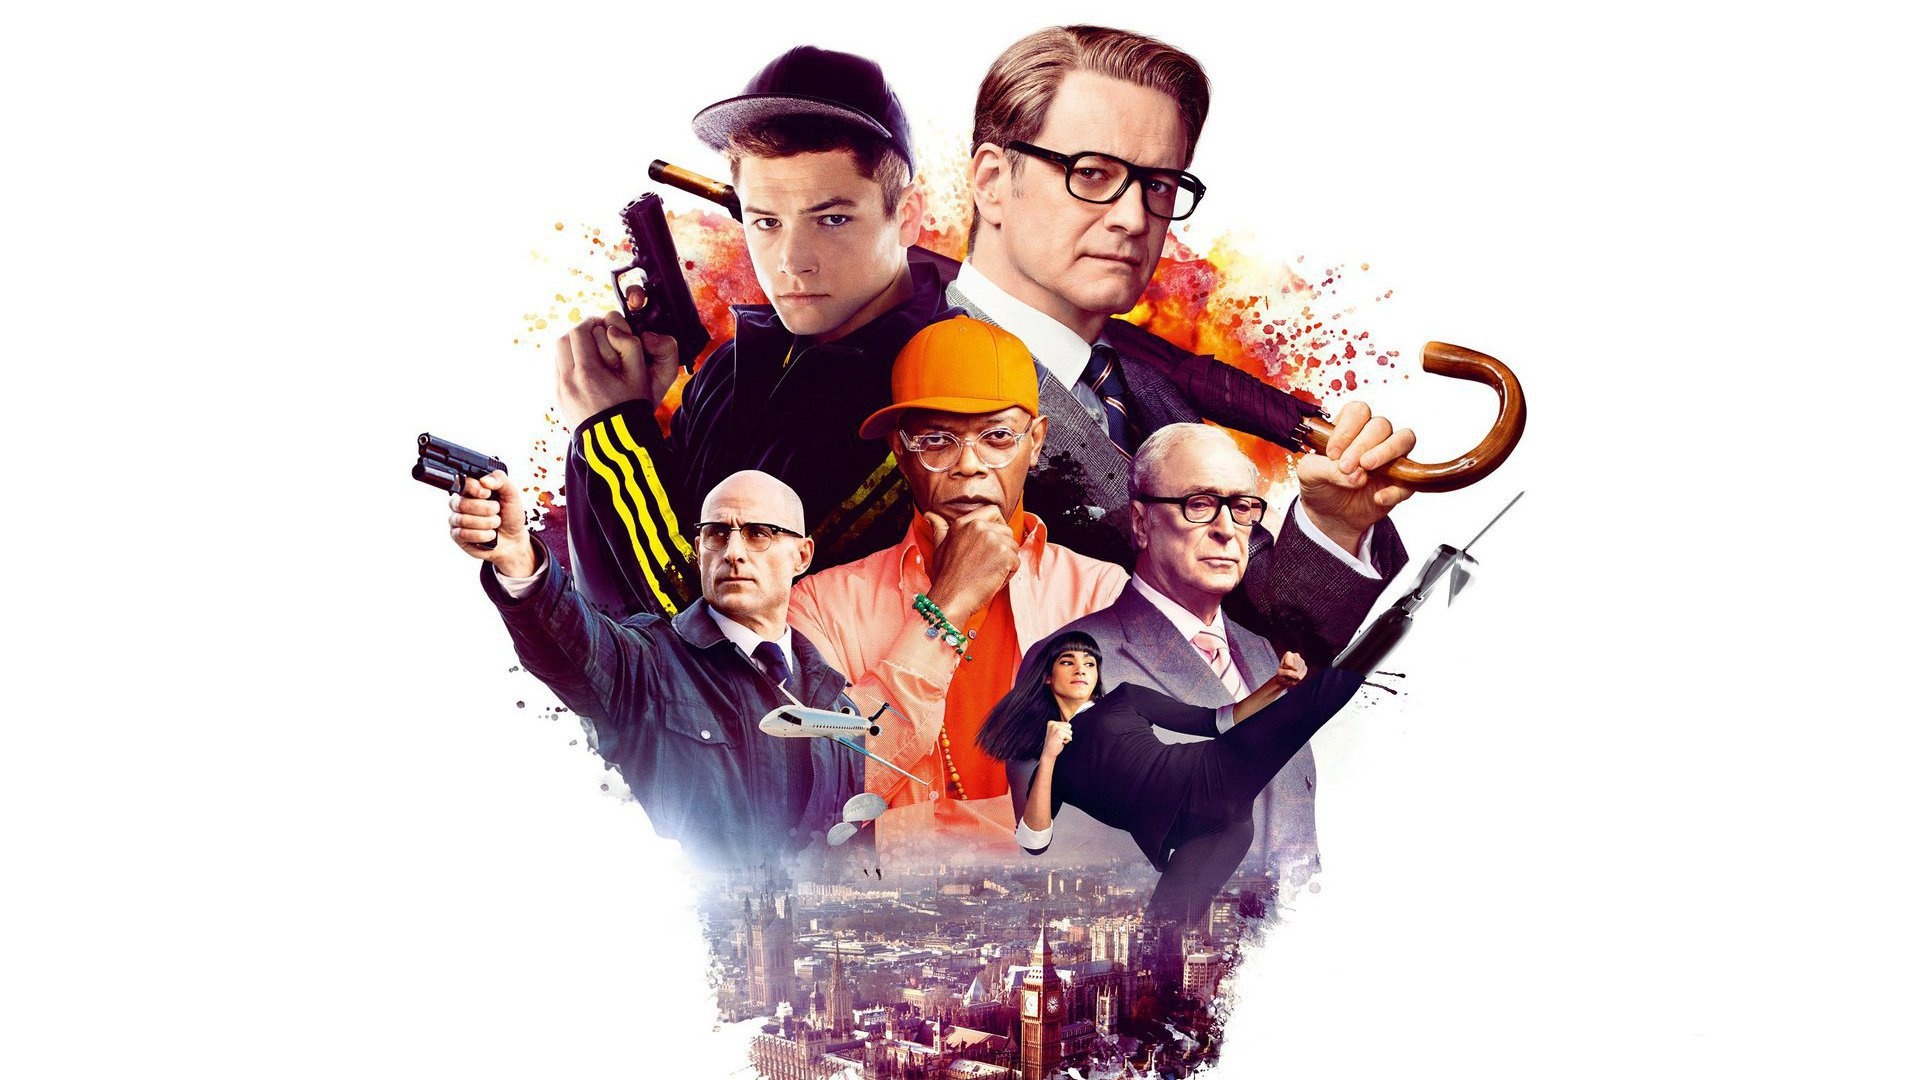 Kingsman: The Secret Service, British spy movie, Exciting undercover operation, Action-packed thriller, 1920x1080 Full HD Desktop